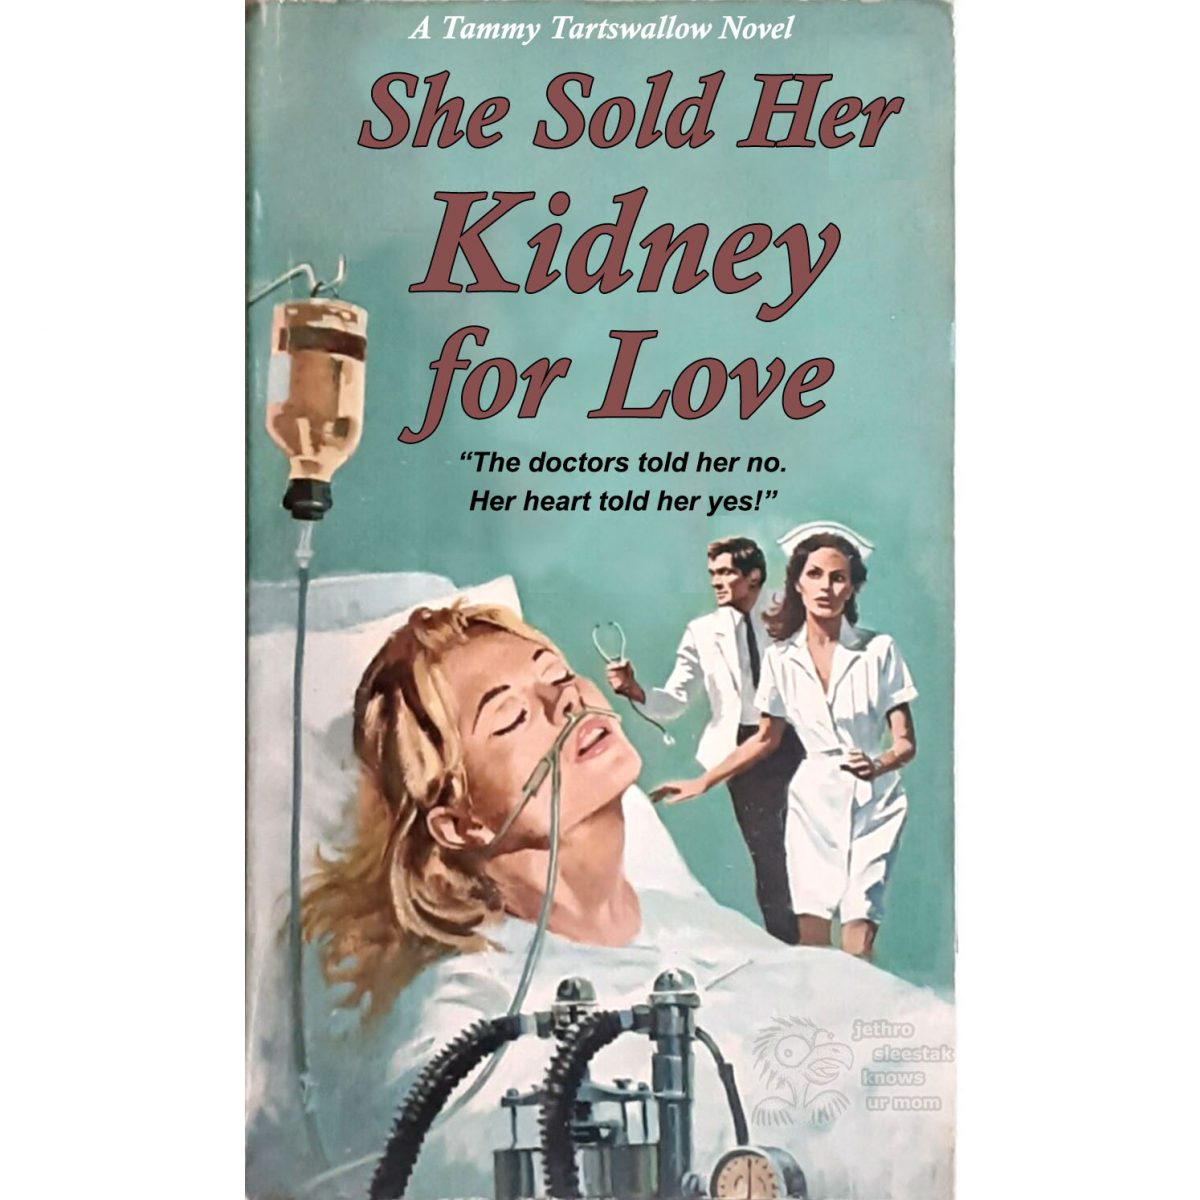 She Sold Her Kidney for Love